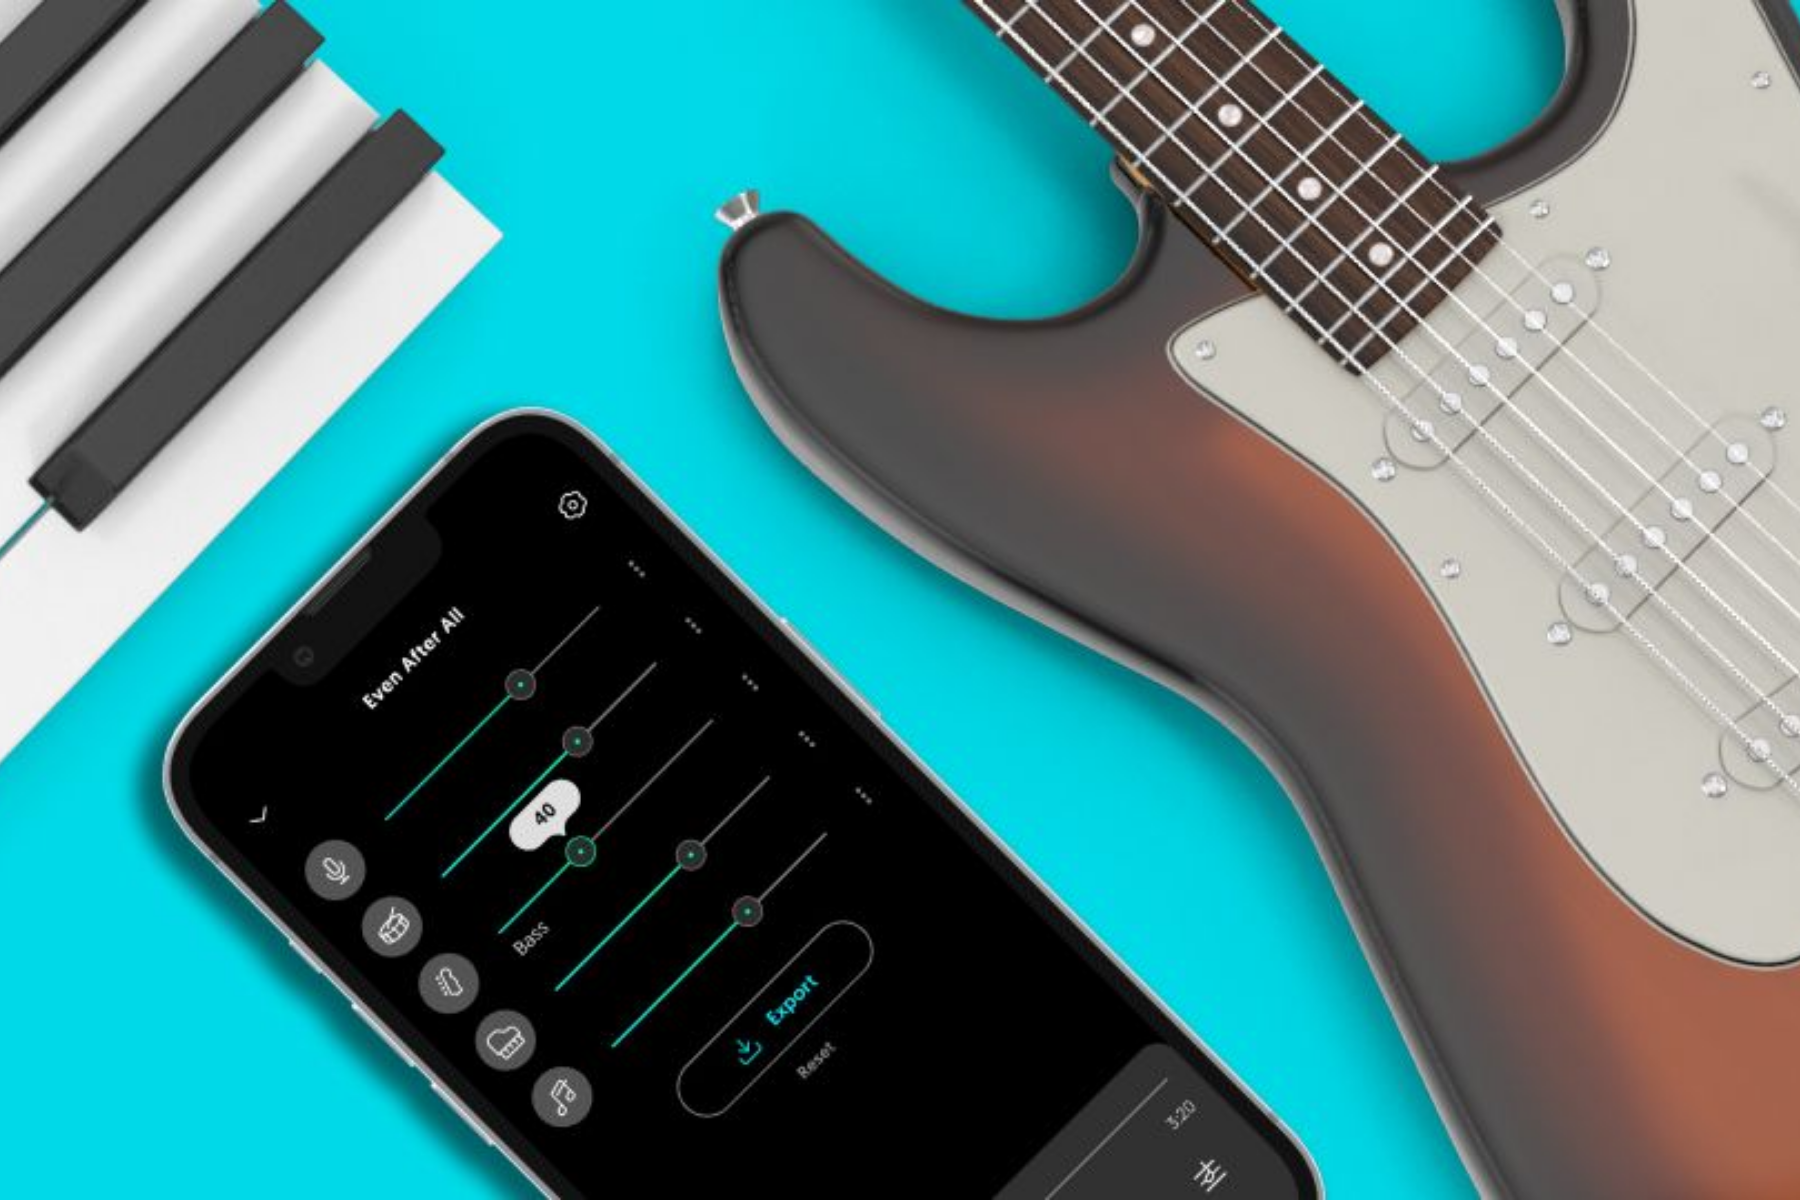 Best Apps For Musicians - Free And Affordable Apps To Improve Your Music